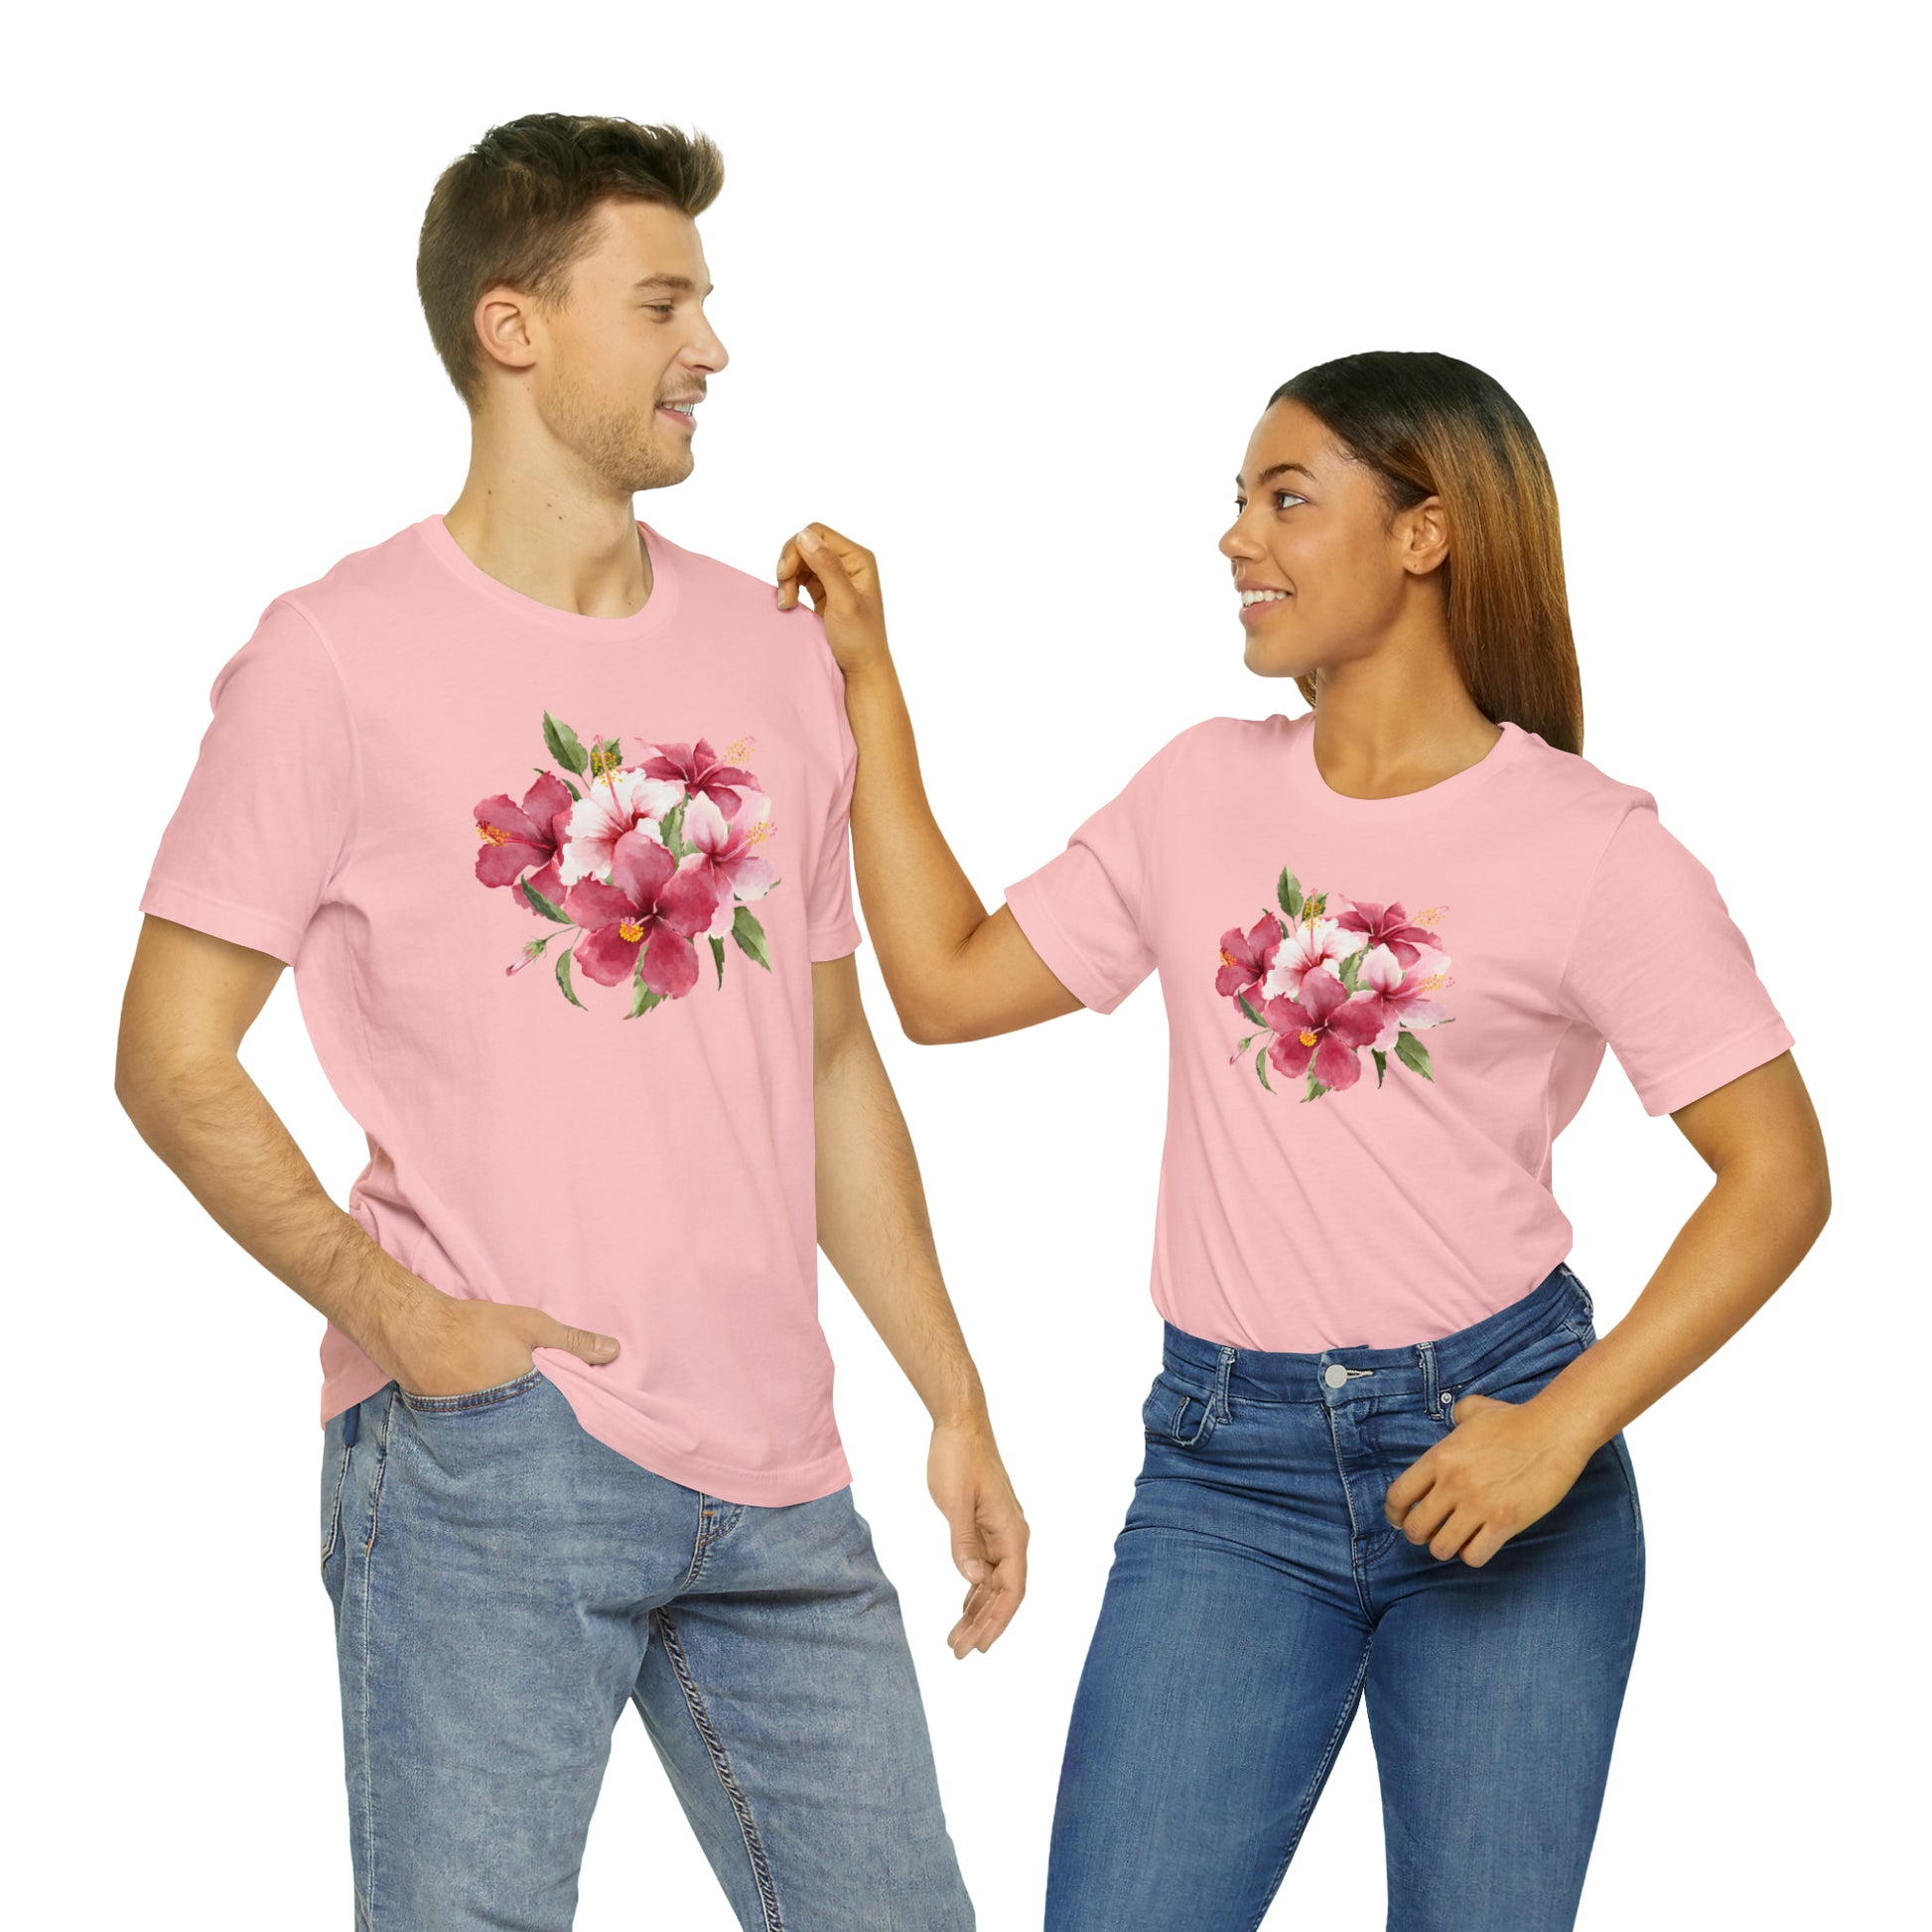 Mock up of a man and a woman; both wearing the Pink shirt